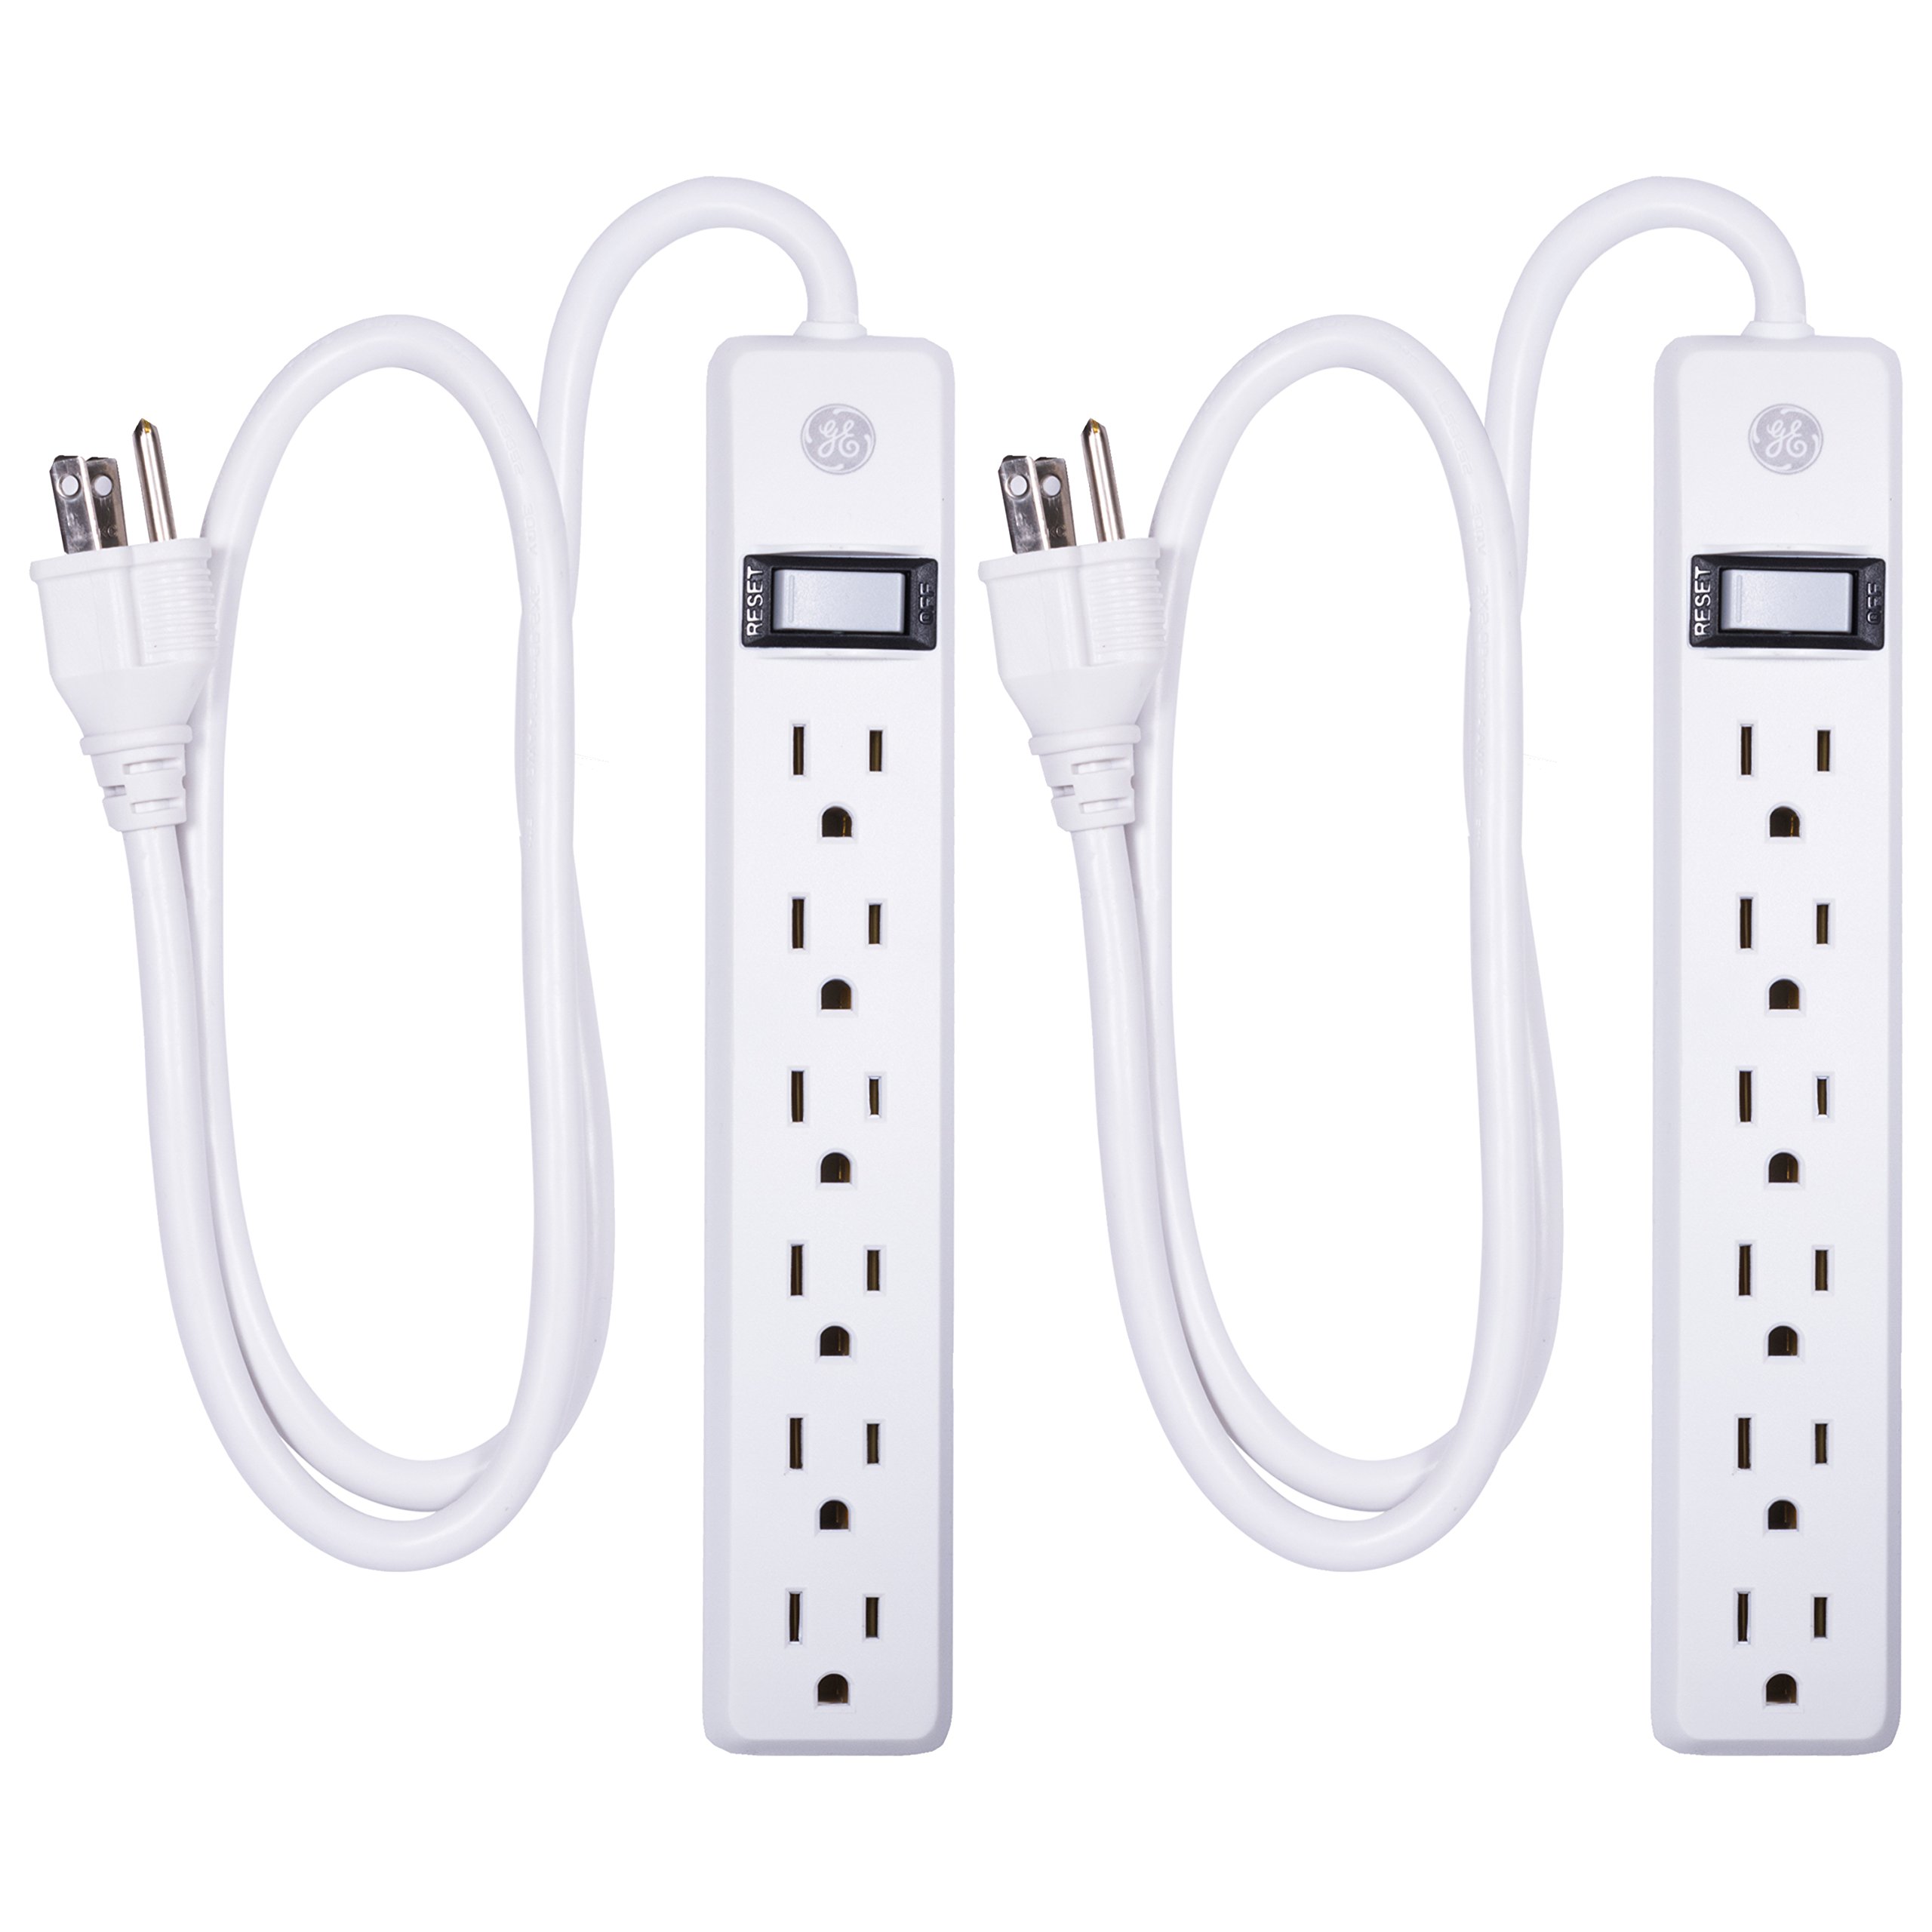 GE 6 Grounded Outlet Surge Protector, 450 Joules, 2 Pack Power Strip, 3 Ft Long Extension Cord & 3-Outlet Power Strip, 12 Ft Extension Cord, 2 Prong, 16 Gauge, Twist-to-Close Safety Outlet Covers